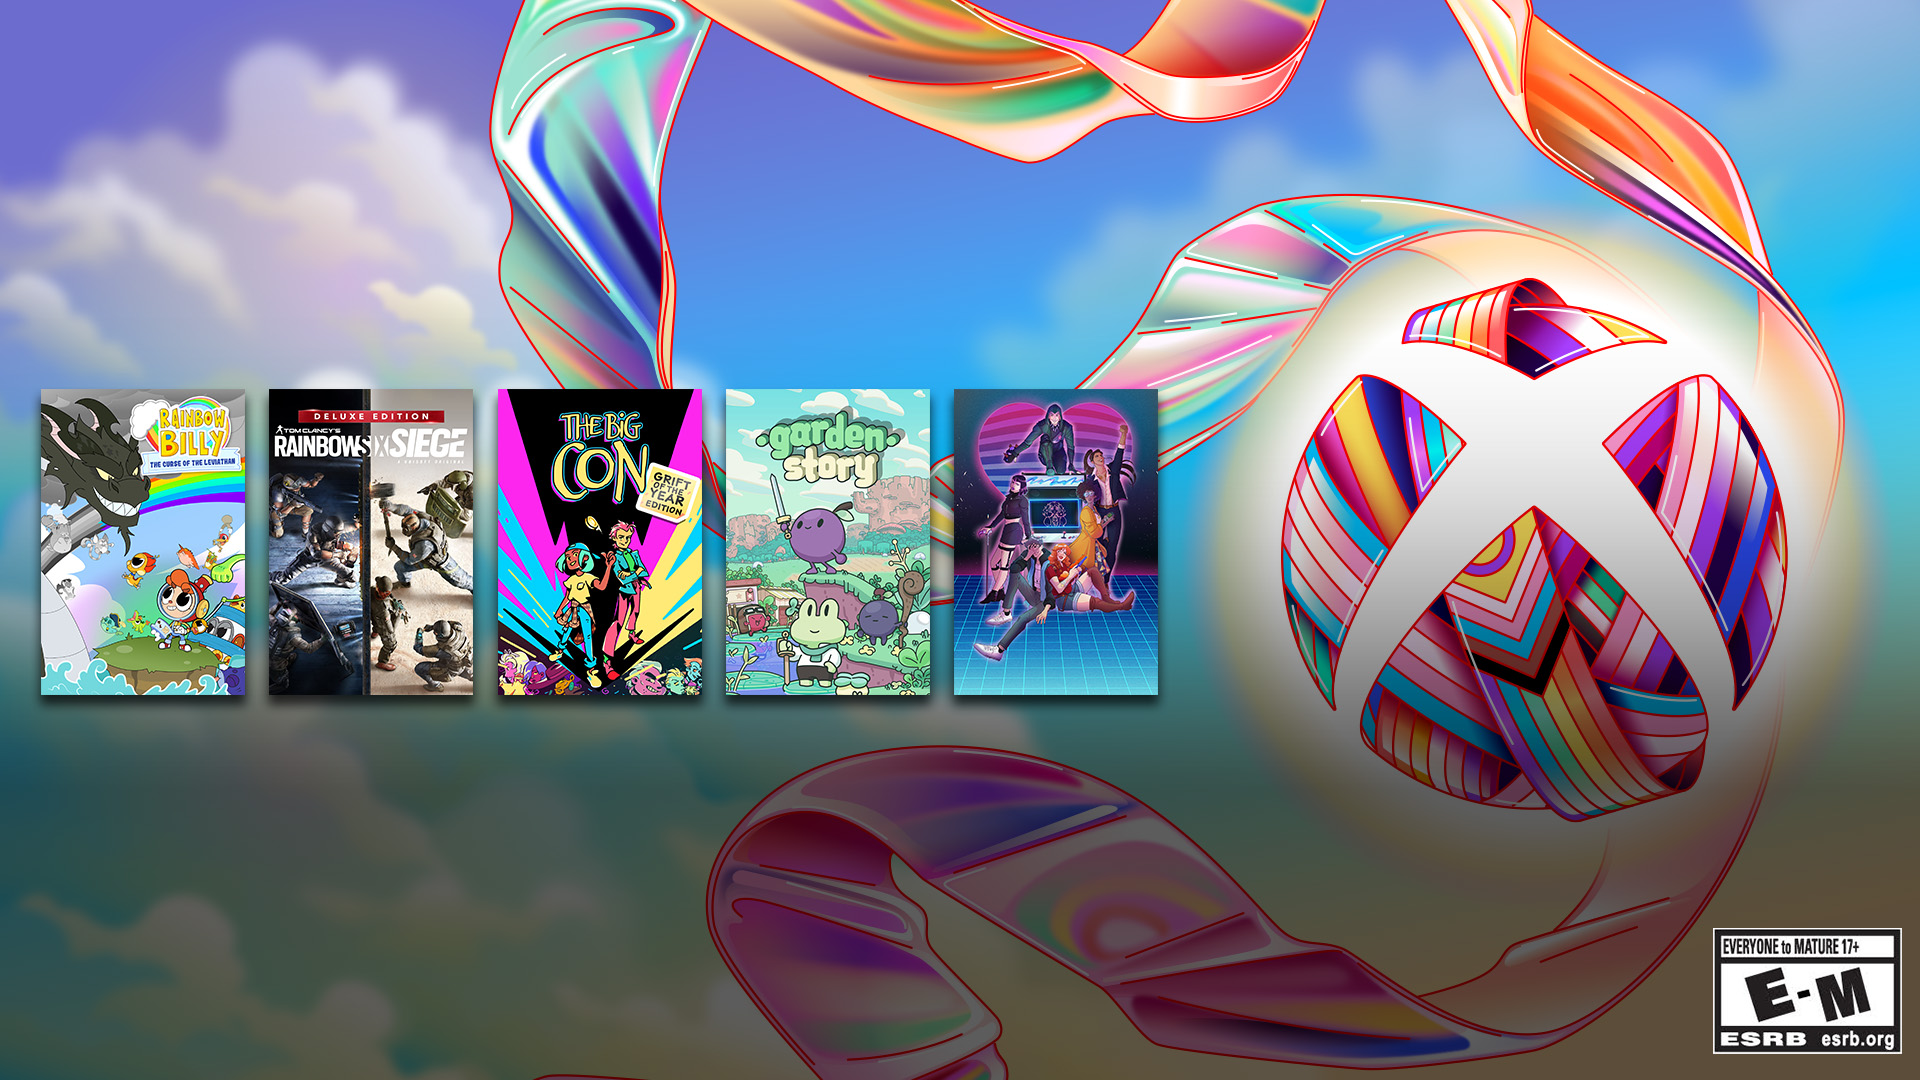 Compilation image featuring box art for Rainbow Billy: The Curse of Leviathan, Tom Clancy’s Rainbow Six Siege, The Big Con, Garden Story, and Arcade Spirits: The New Challengers with the stylized Xbox ribbon ball logo in the background.